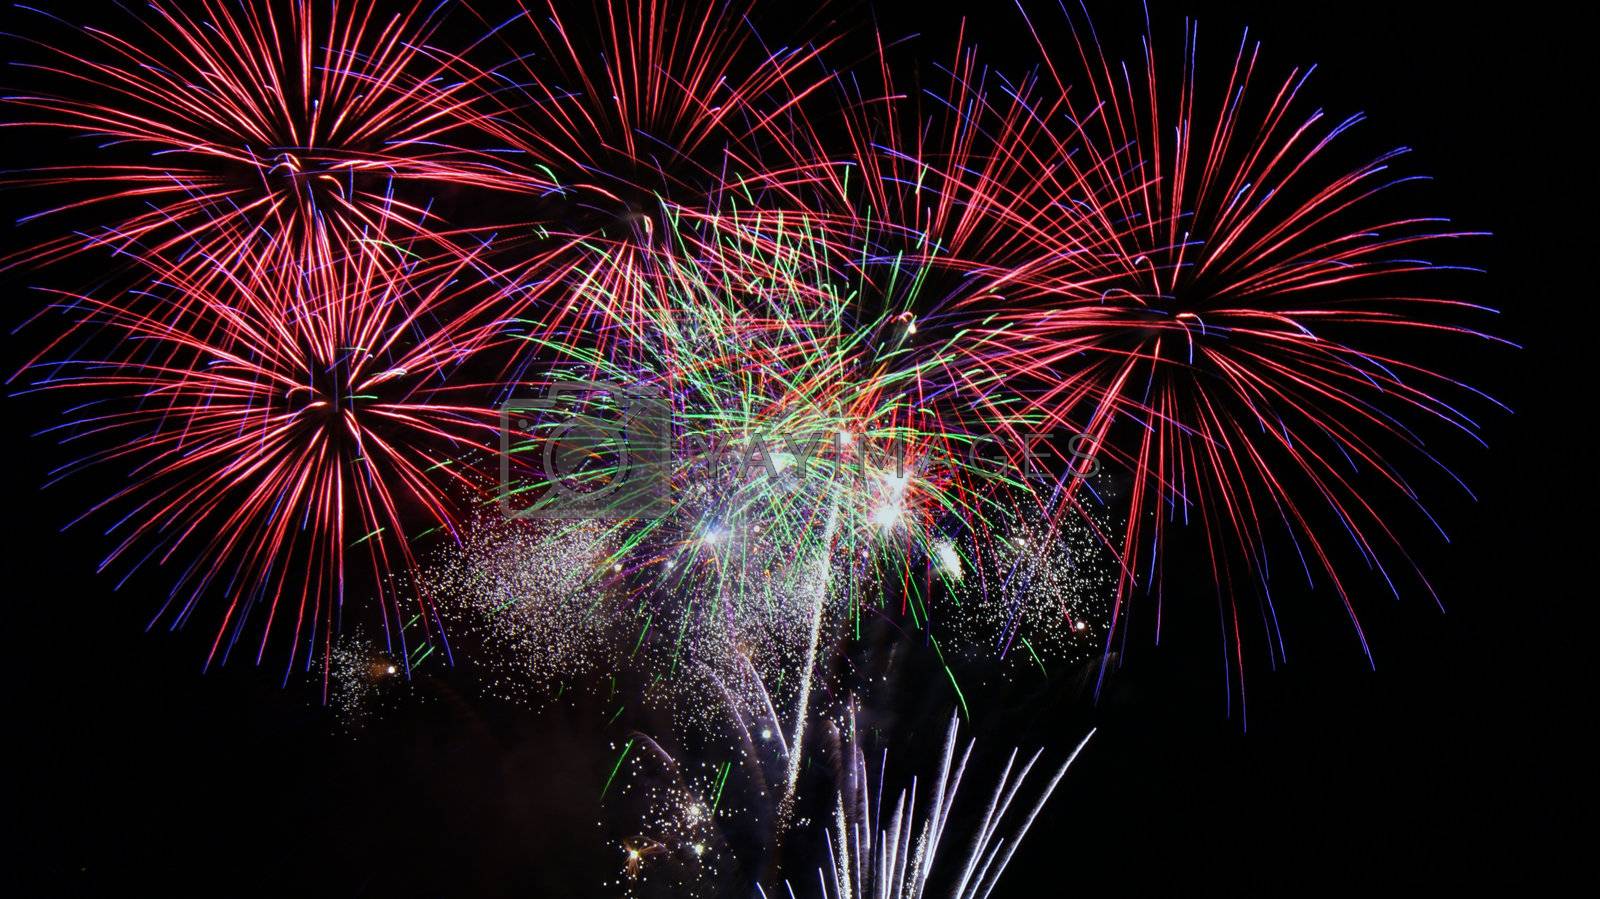 Royalty free image of An image of beautiful fireworks celebration by merc67